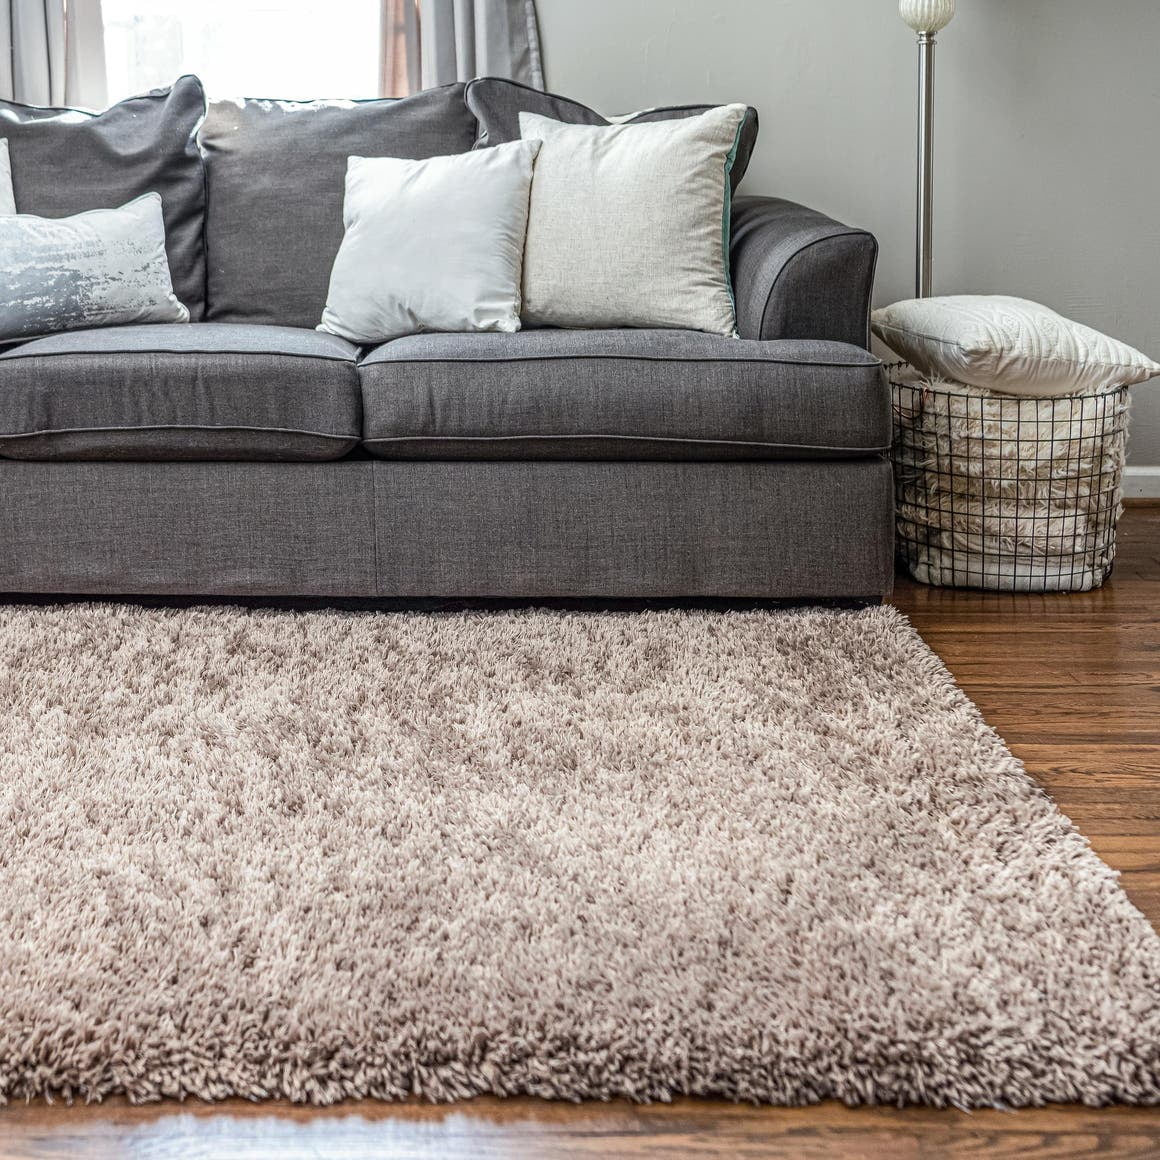 Thick Flecked Sivler RugsNon Shed Living Room RugsShaggy Rugs For Bedroom